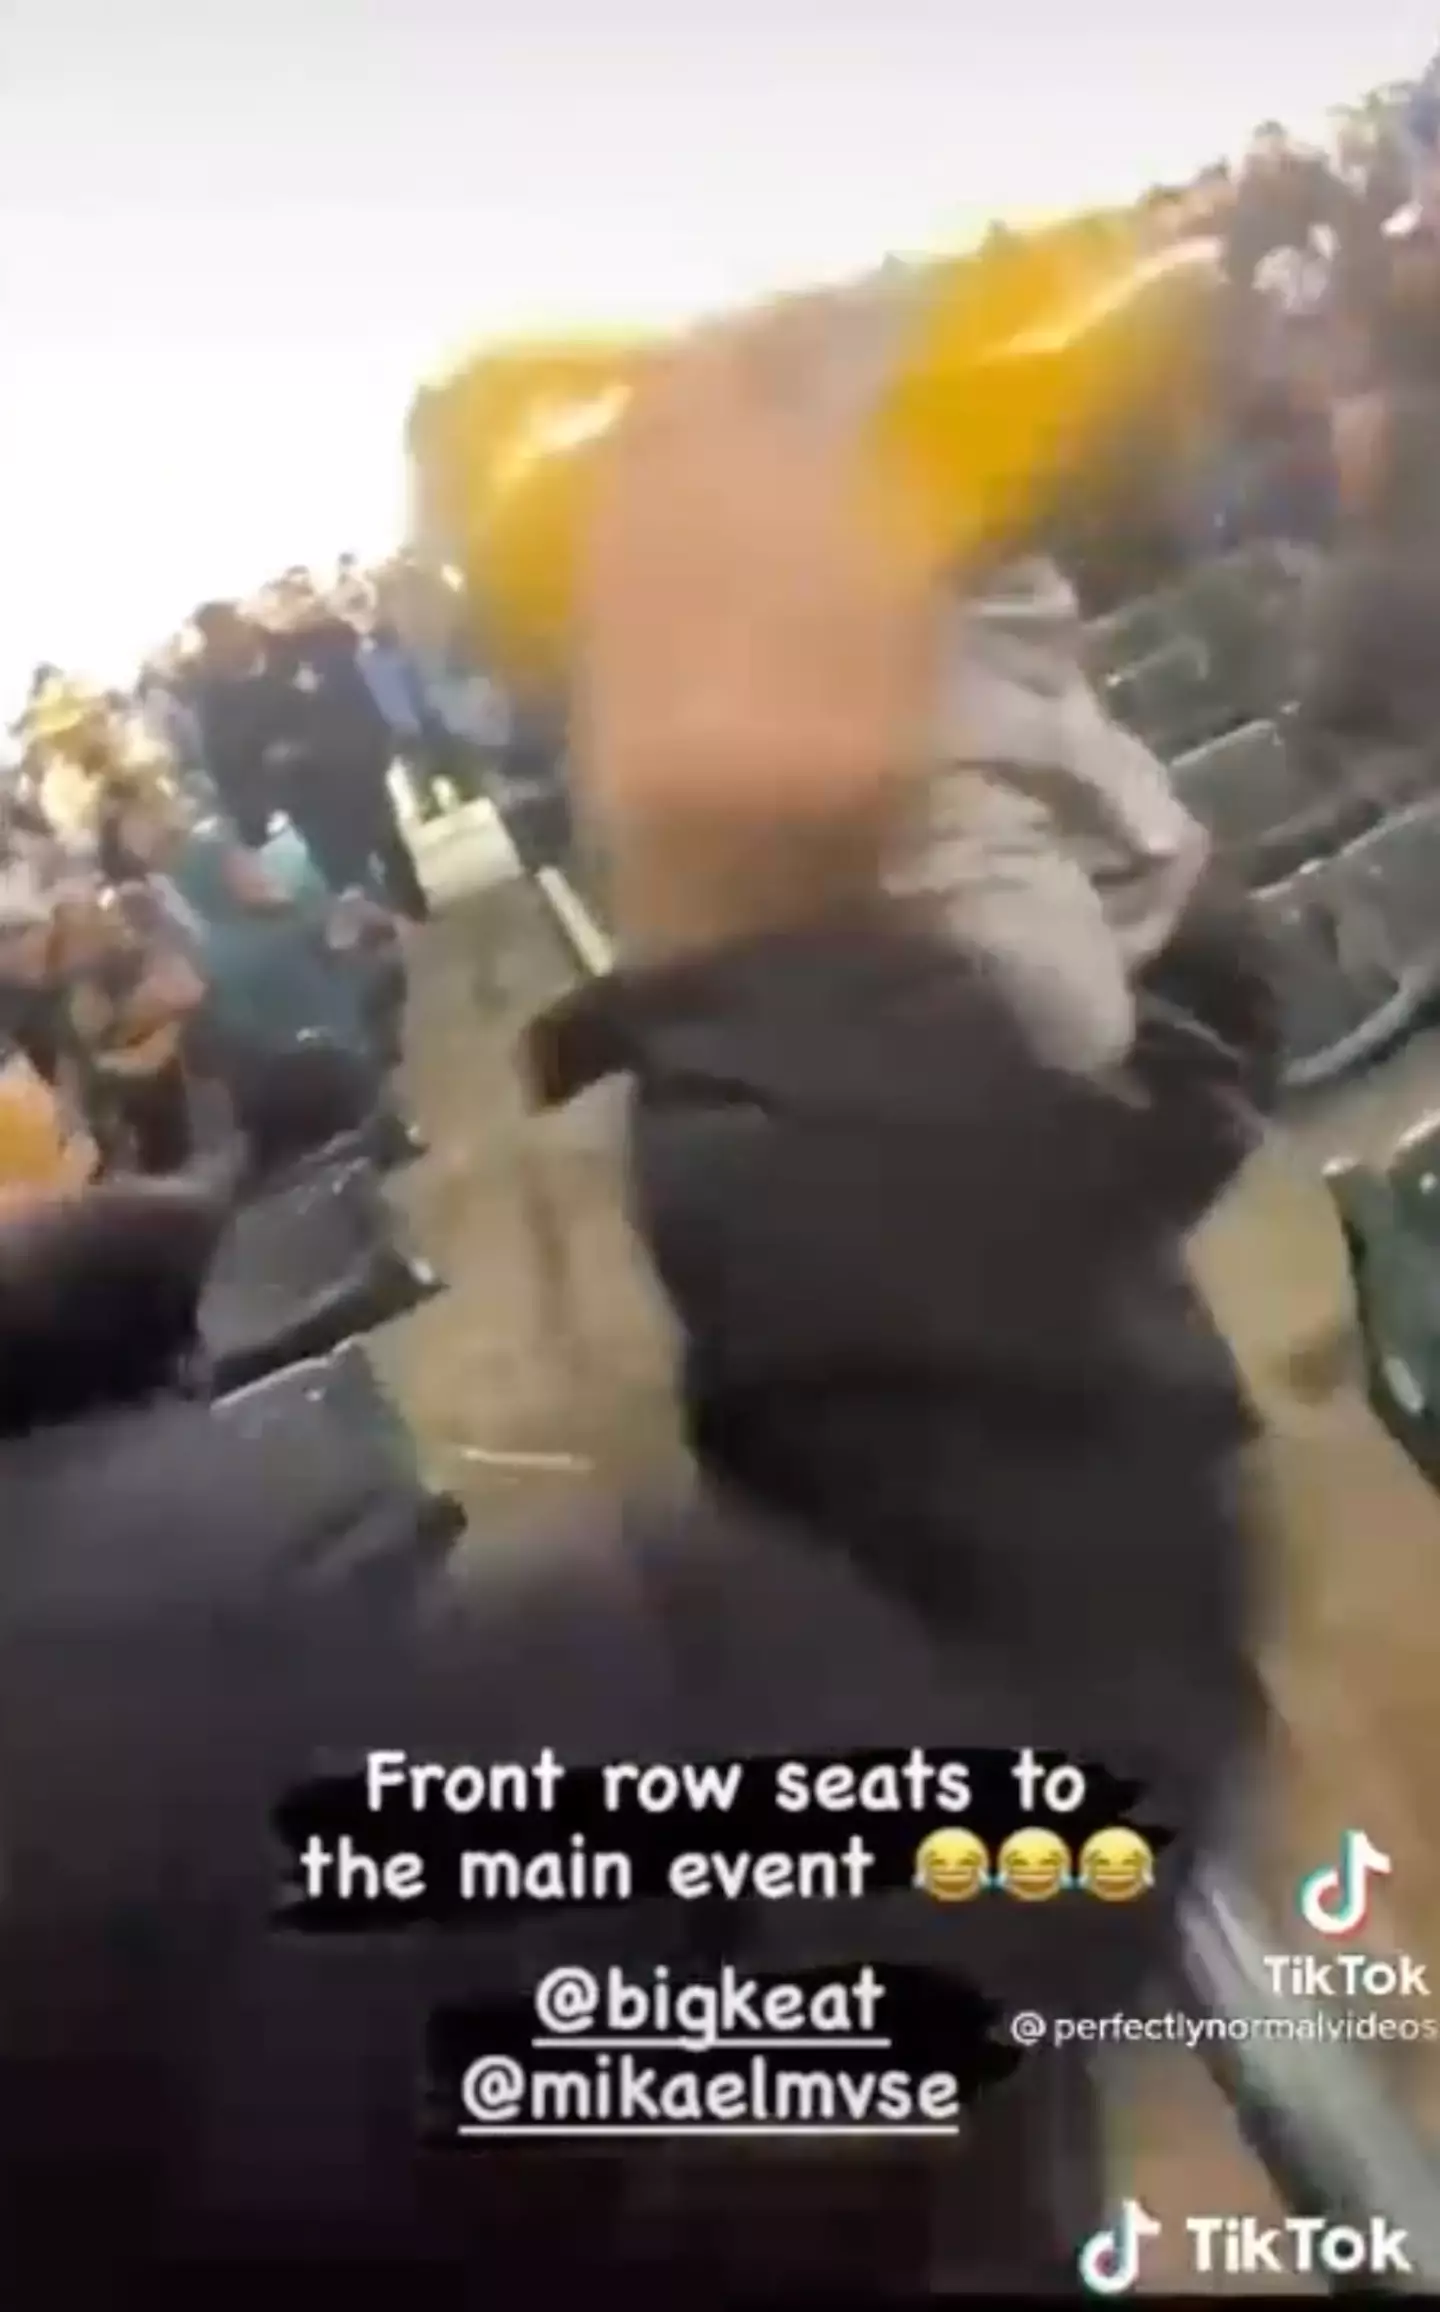 Other fans hurled beer at the woman who objected.